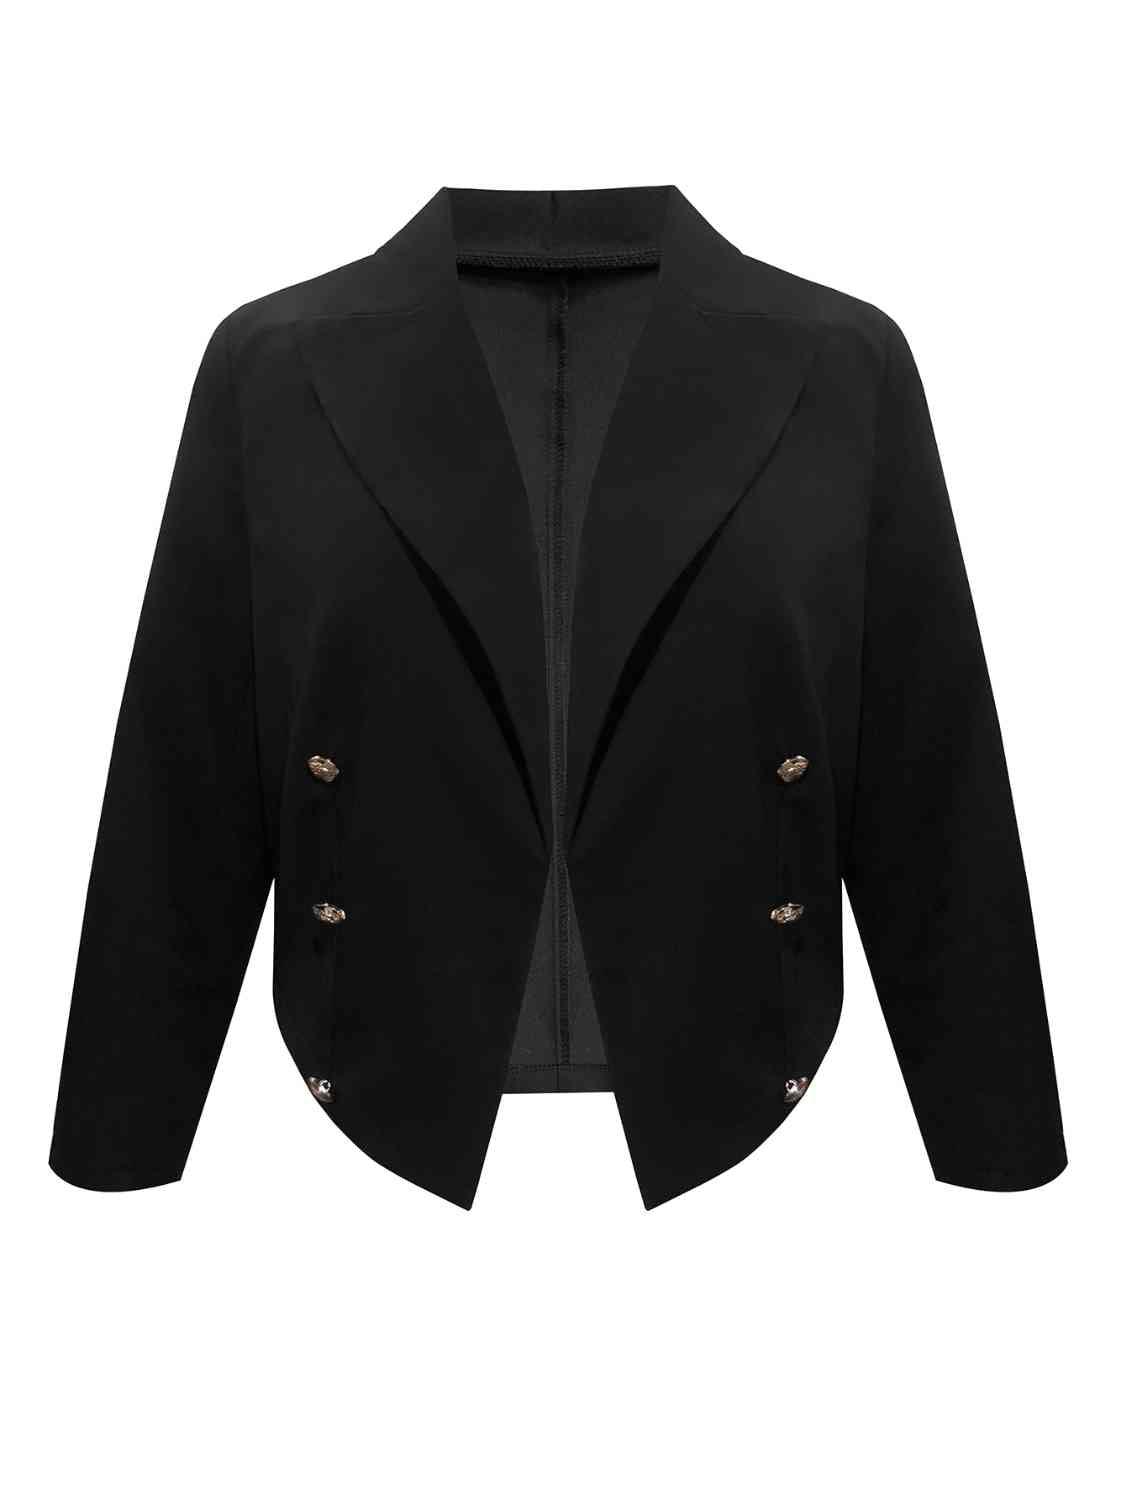 a black jacket with buttons on the front